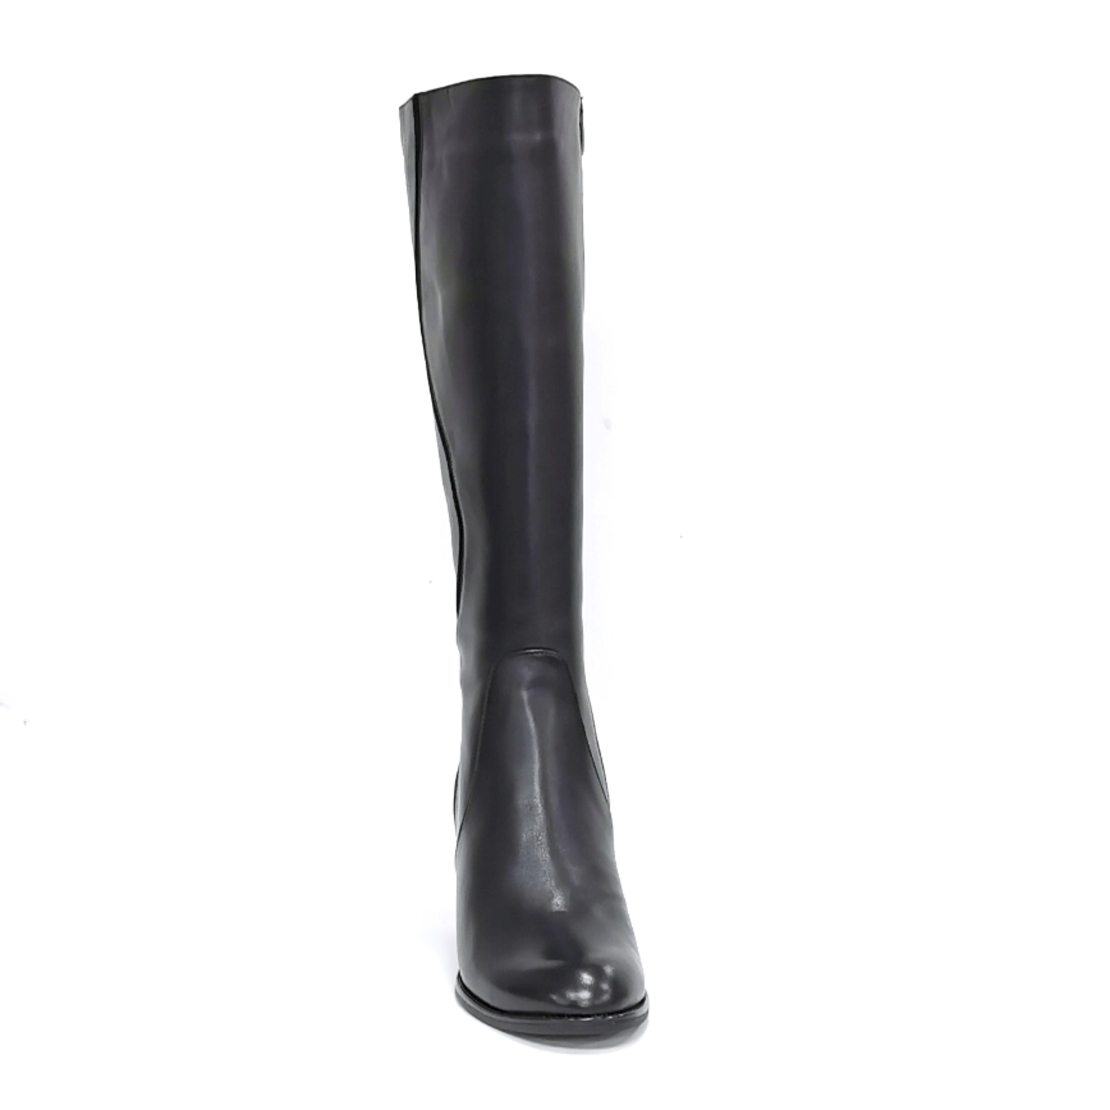 Women's elegant boots made of natural leather in black/7503